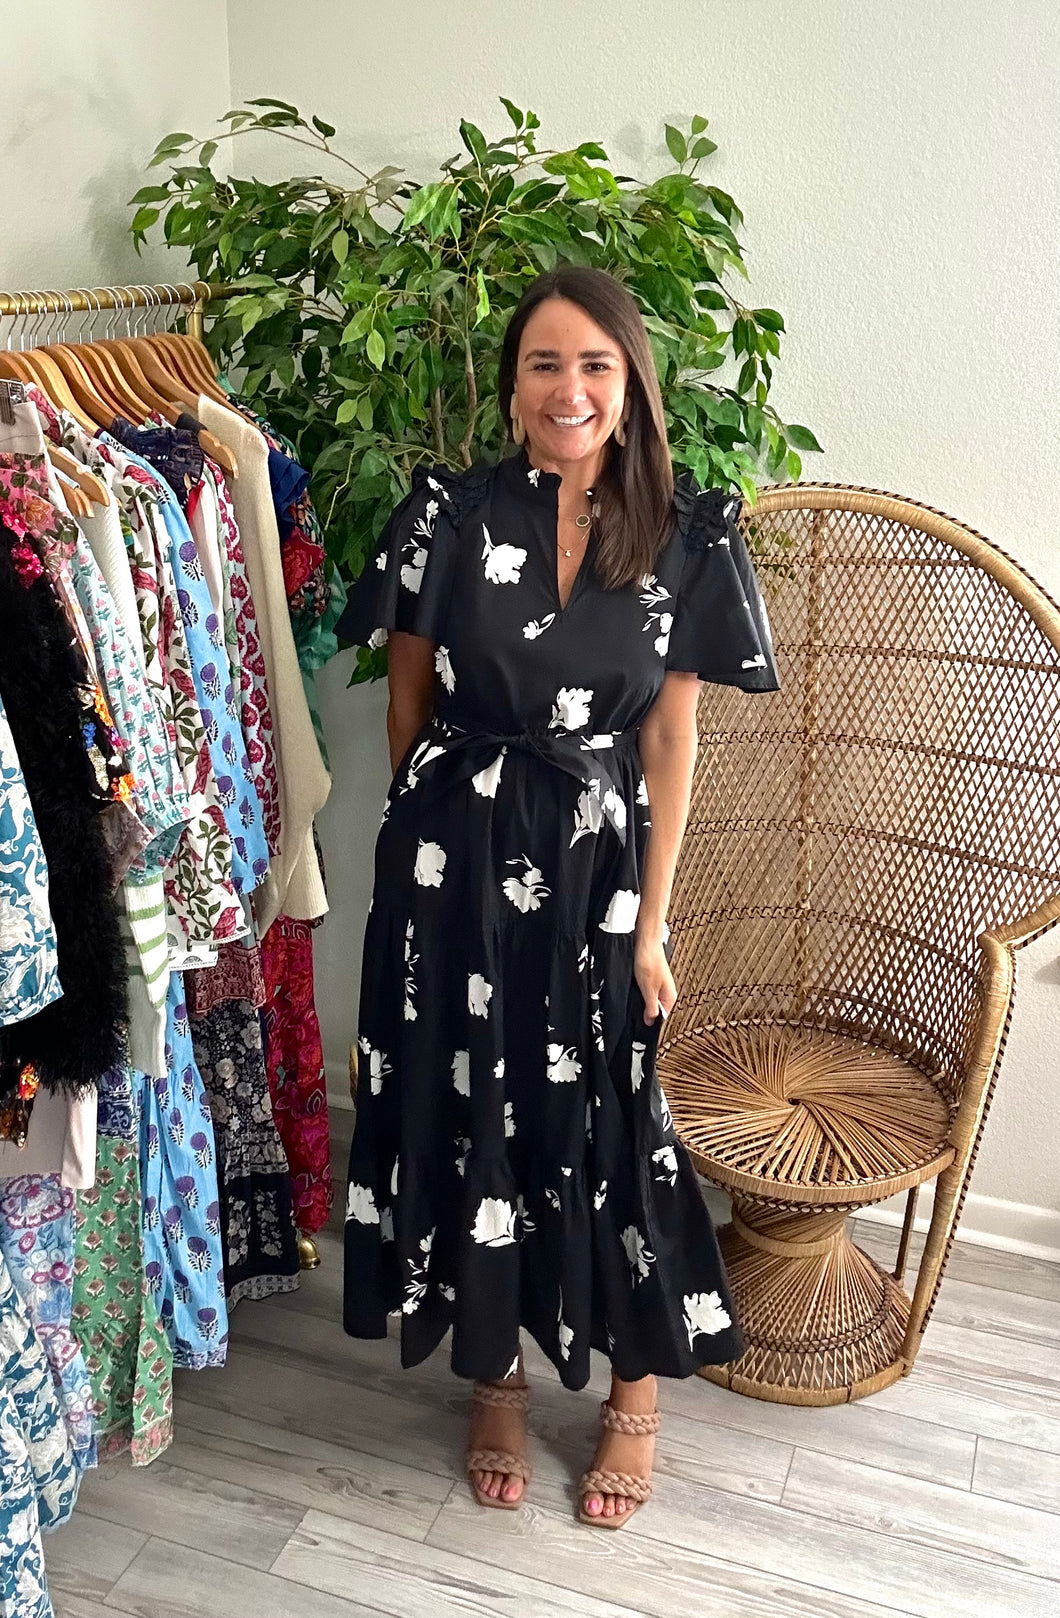 Esconido tiered midi dress in flyer noir print. Flutter sleeves with ruffle detailing at shoulders. Removable tie at waist and tiered skirt with pockets. Cotton poplin.  Fits roomy, size down if between sizes. Wearing size x-small.  Good for bump, post bump or no bump!